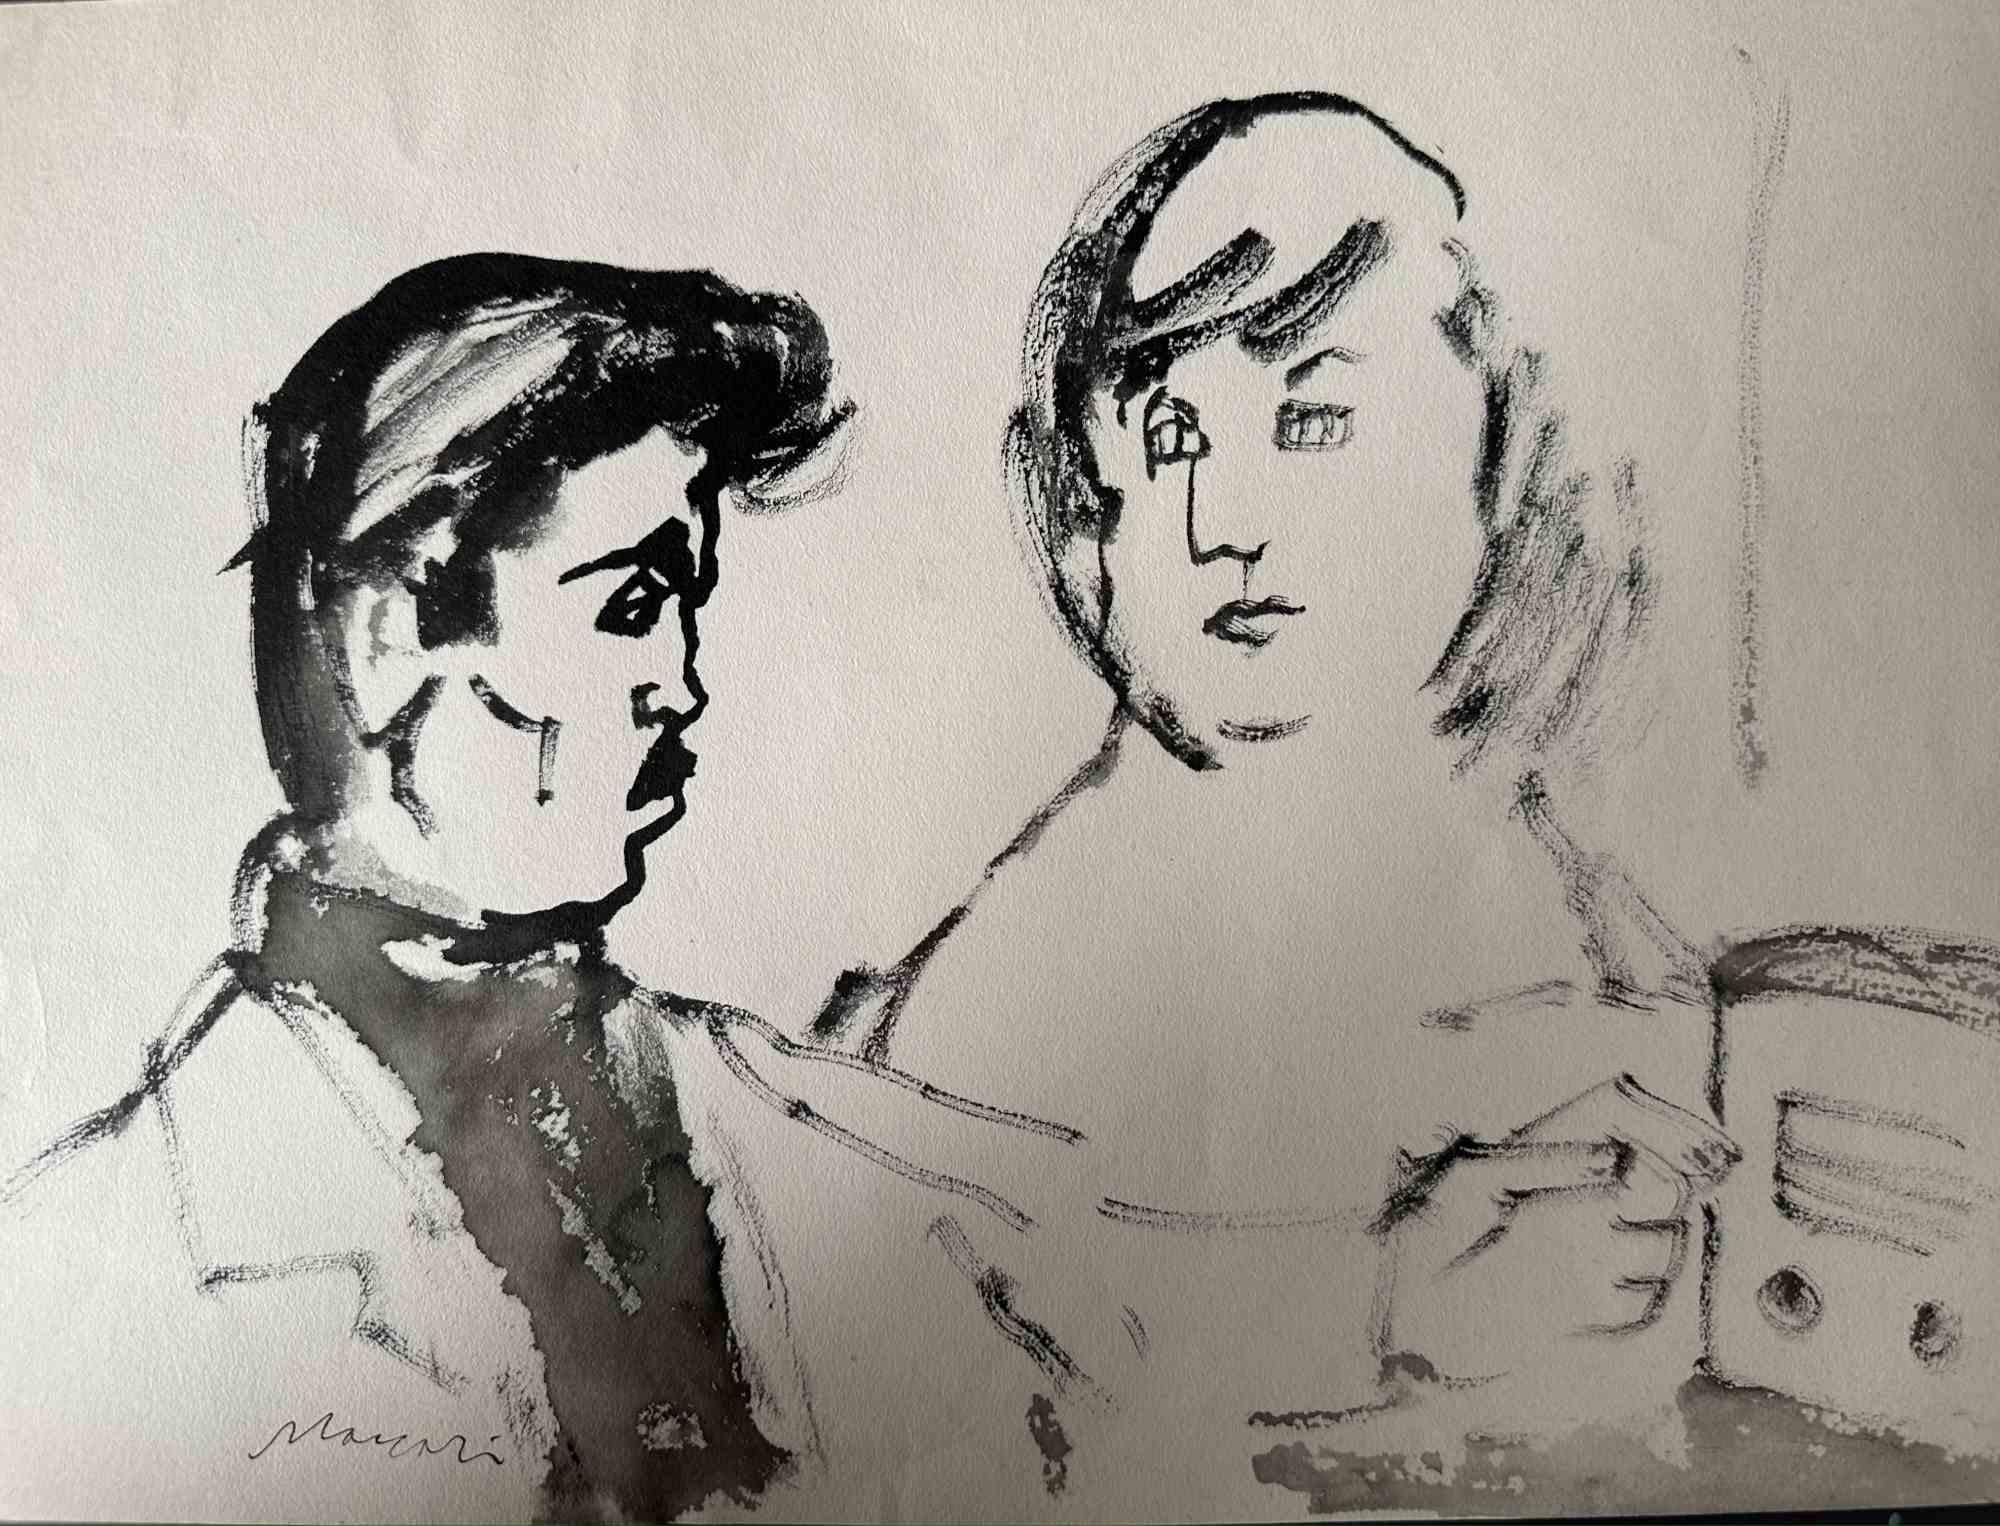 The Couple is a China ink and watercolor Drawing realized by Mino Maccari  (1924-1989) in the 1960s.

Hand-signed on the lower.

Good conditions.

Mino Maccari (Siena, 1924-Rome, June 16, 1989) was an Italian writer, painter, engraver and